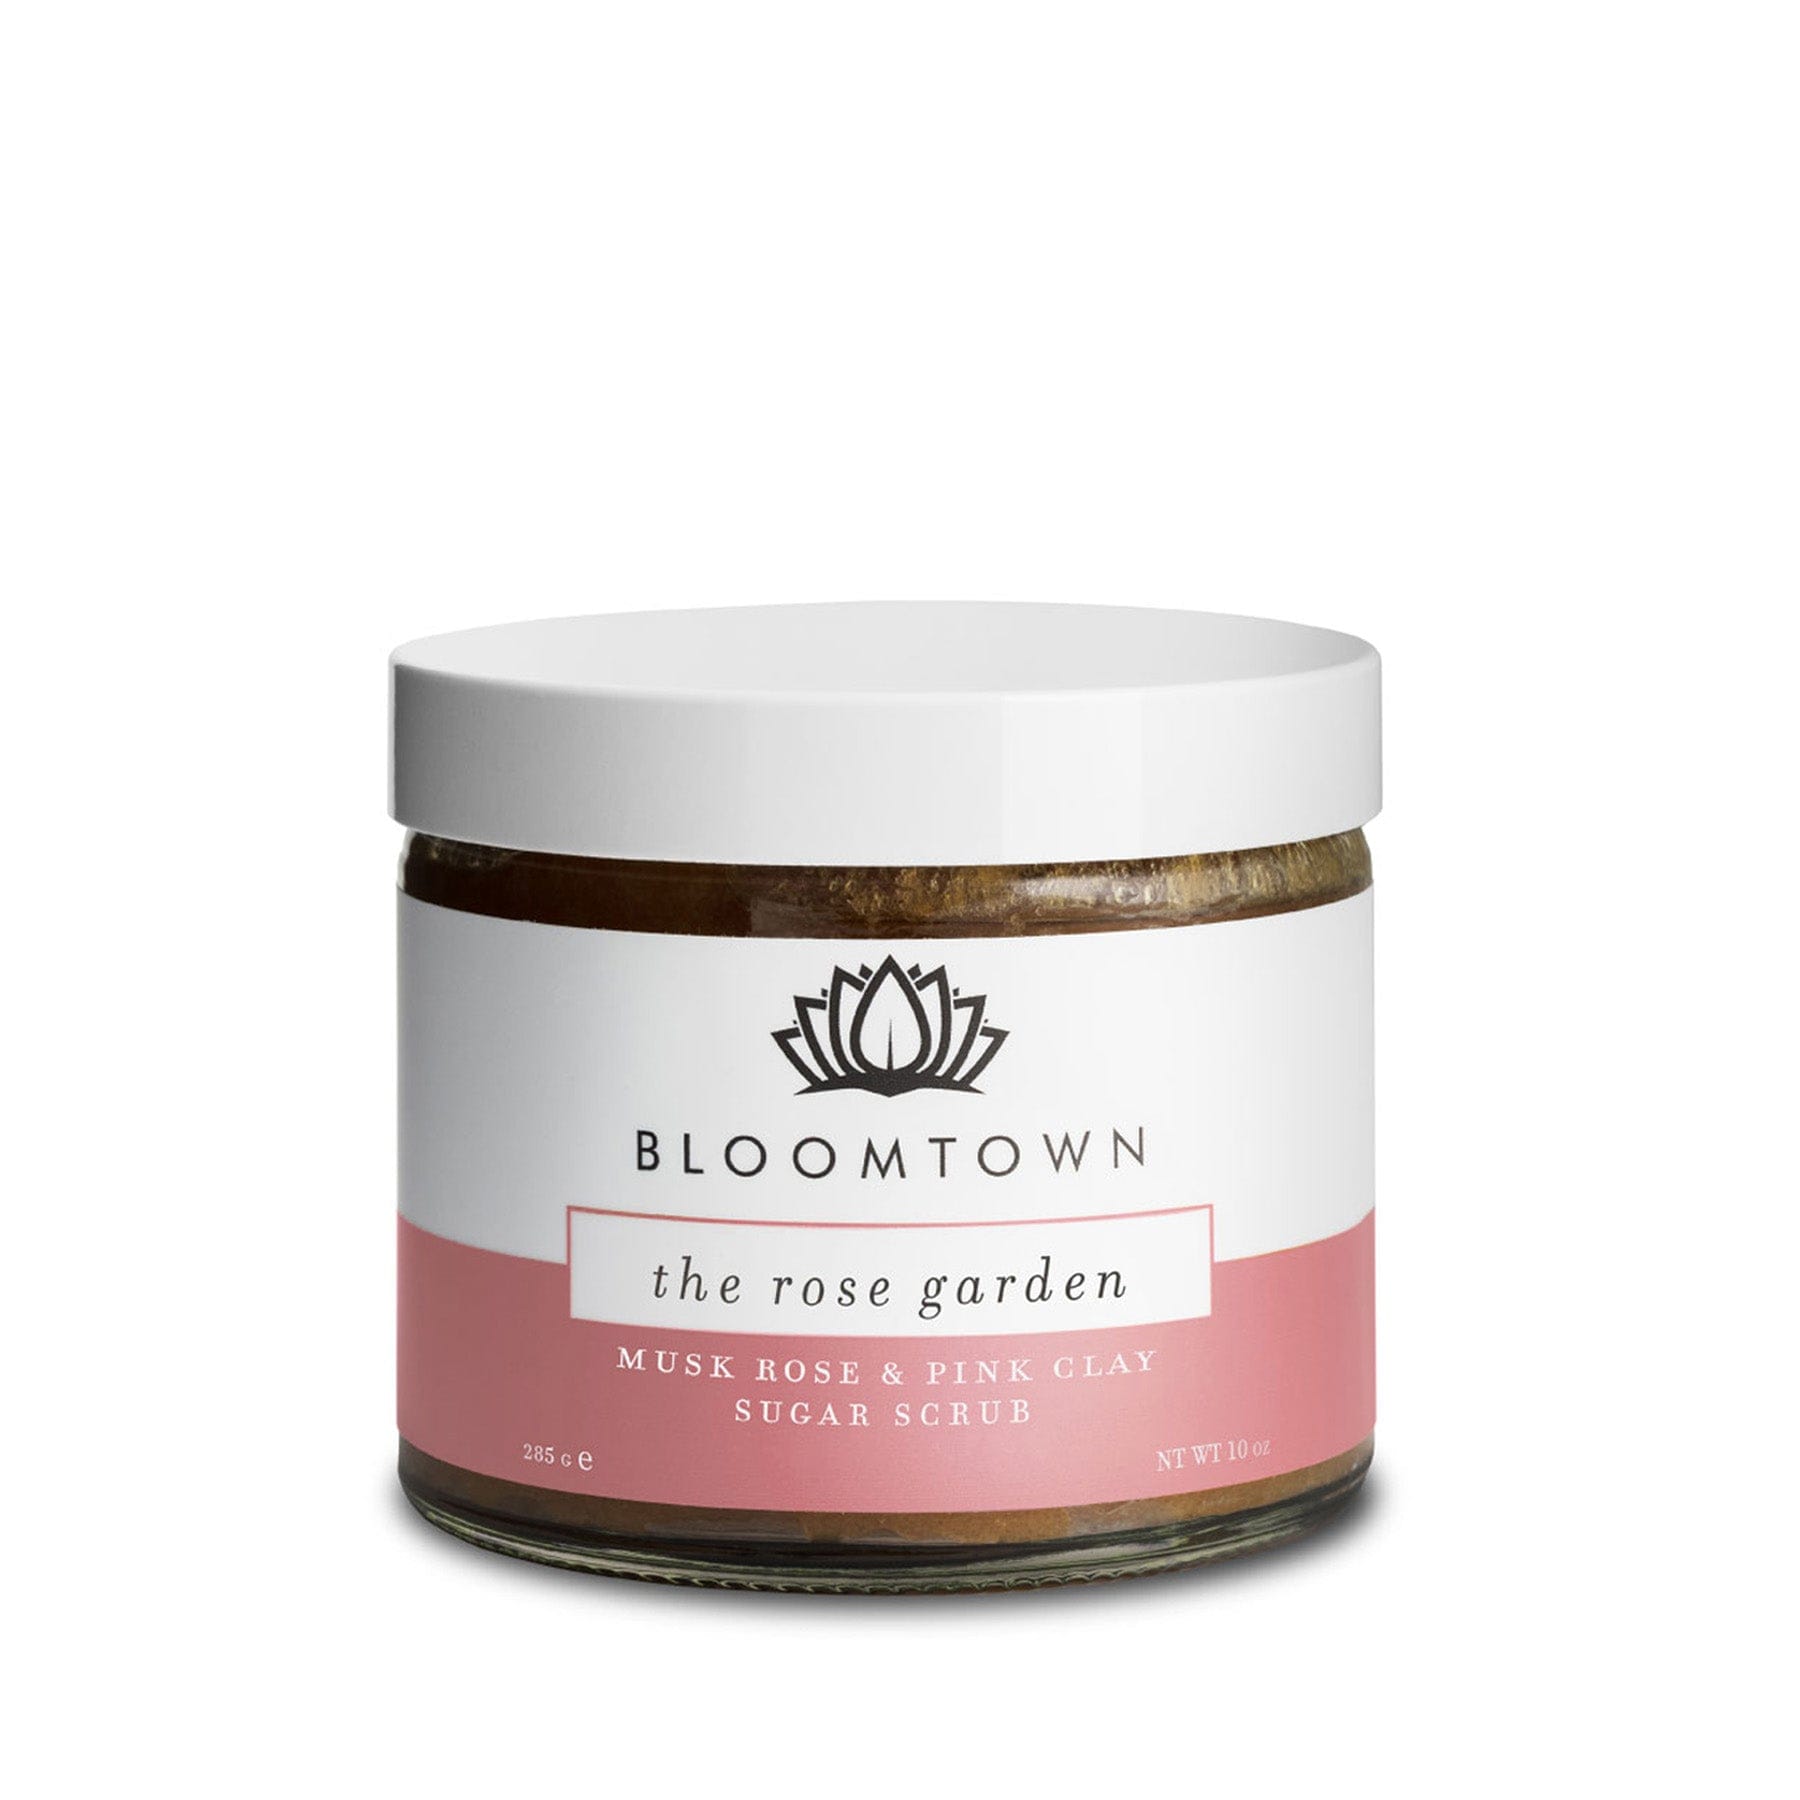 Bloomtown The Rose Garden sugar scrub jar with musk rose and pink clay on white background